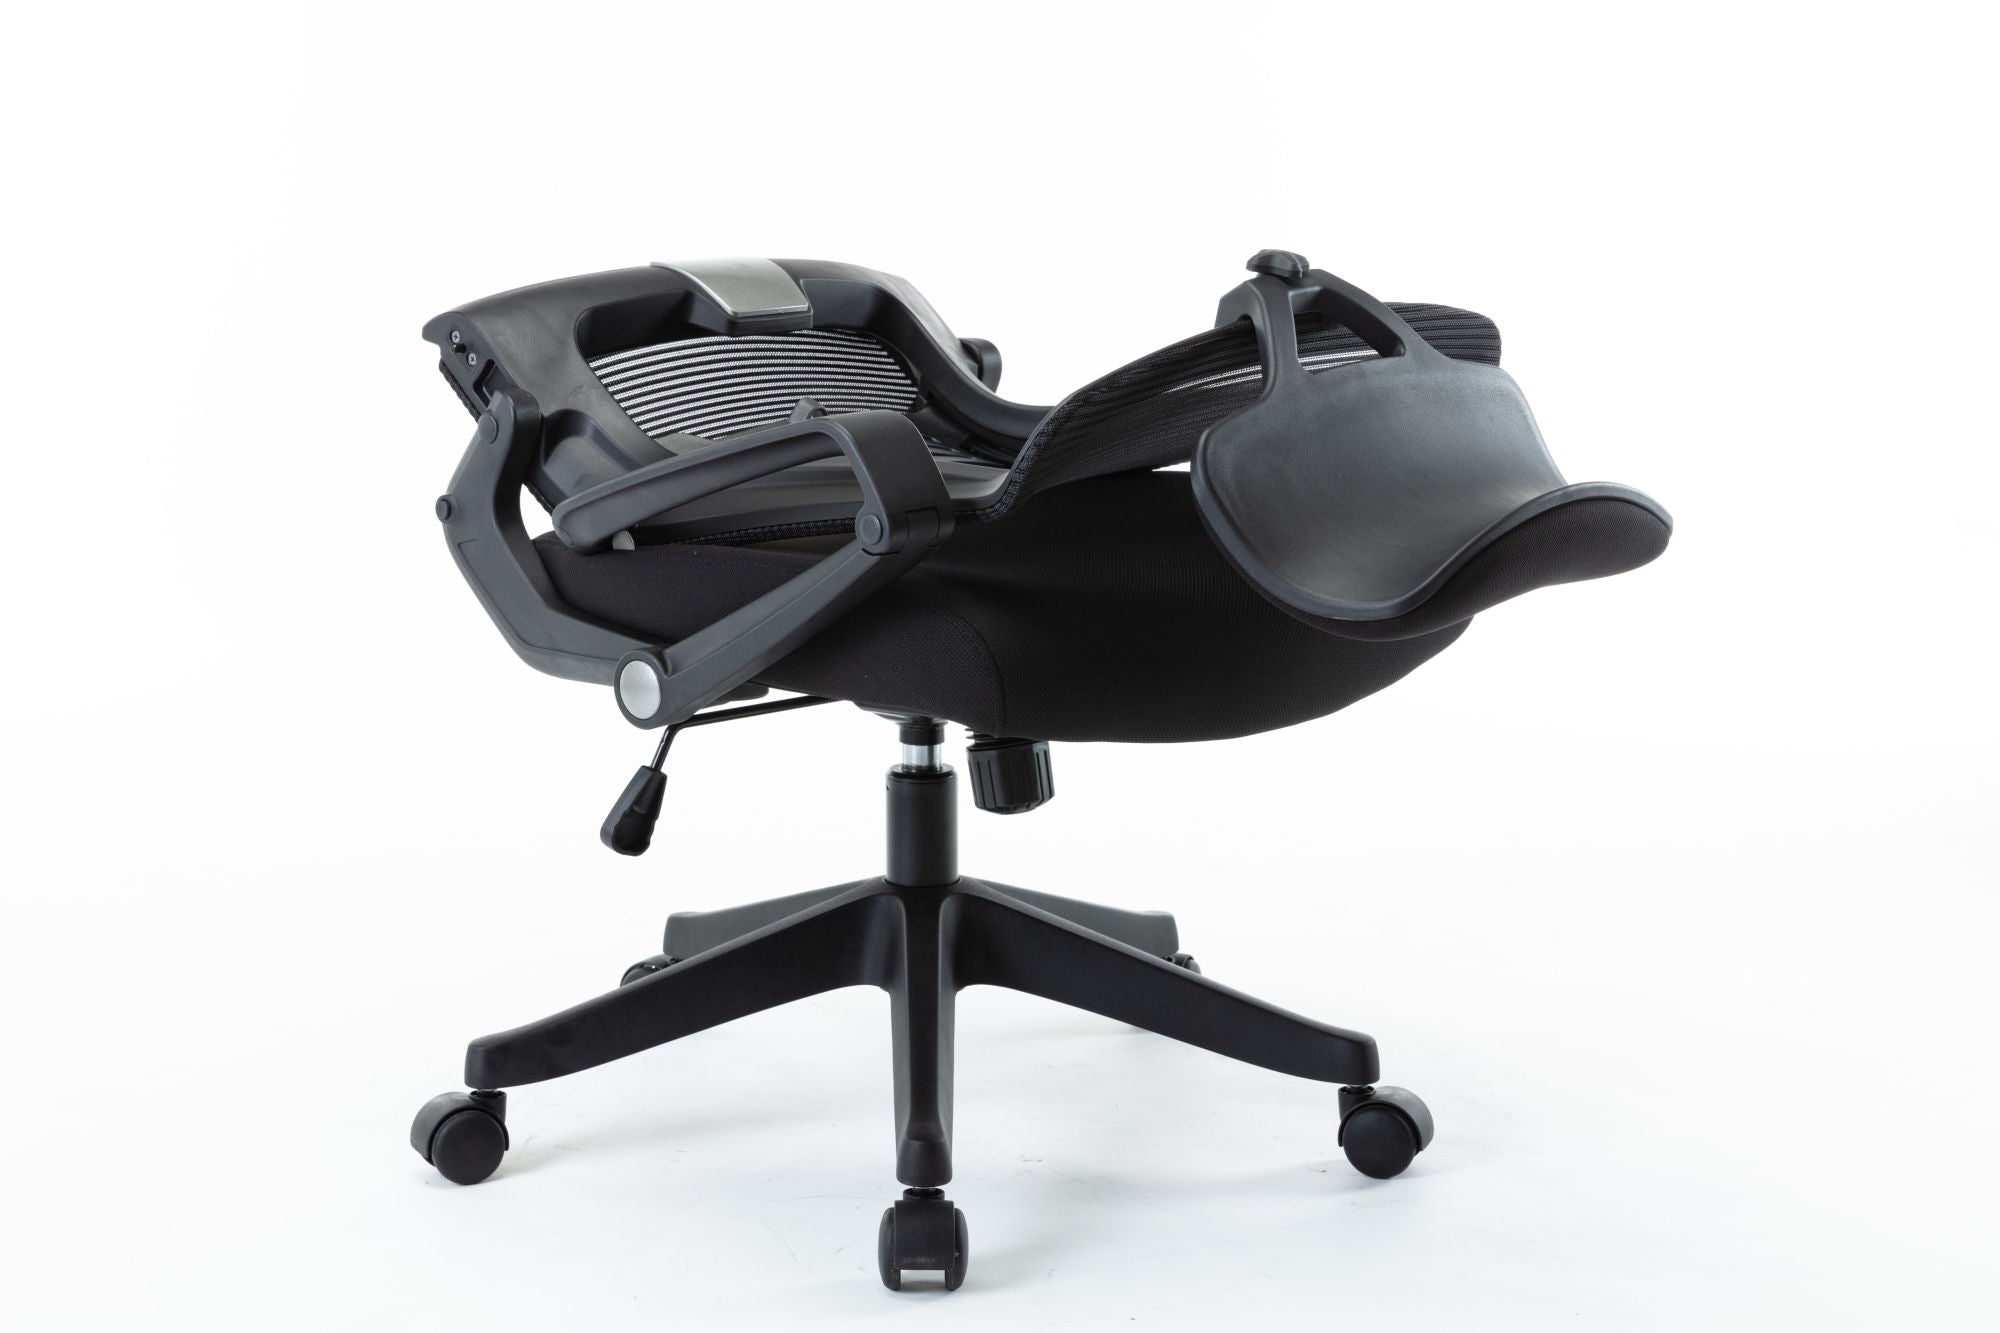 Free Shipping Mesh Office Chair, High Back Chair - Adjustable Headrest with Arms,  Lumbar Support